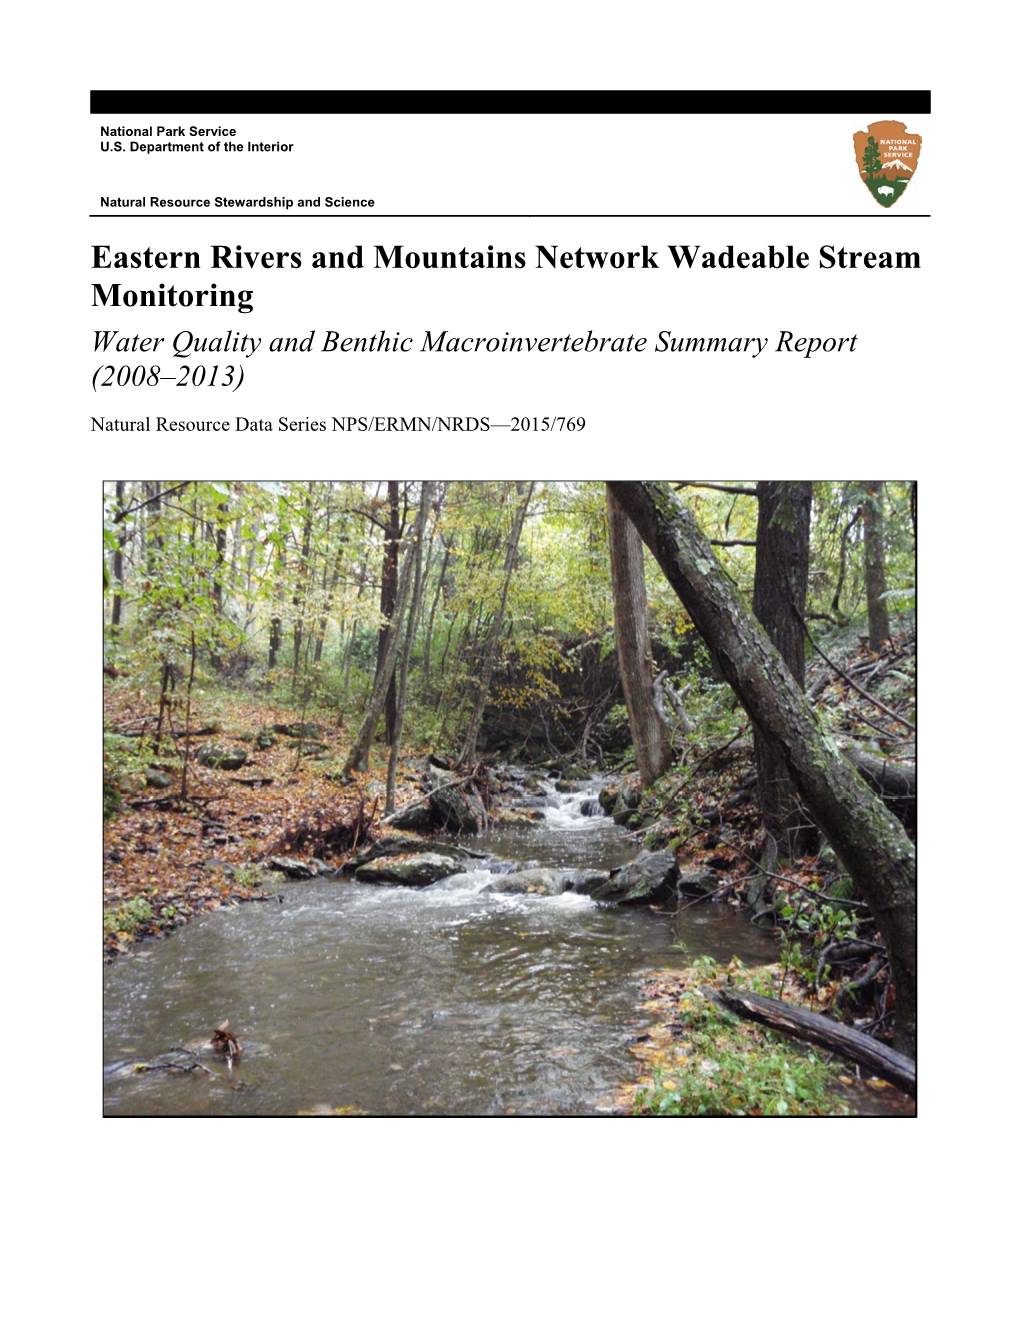 Eastern Rivers and Mountains Network Wadeable Stream Monitoring Water Quality and Benthic Macroinvertebrate Summary Report (2008–2013)